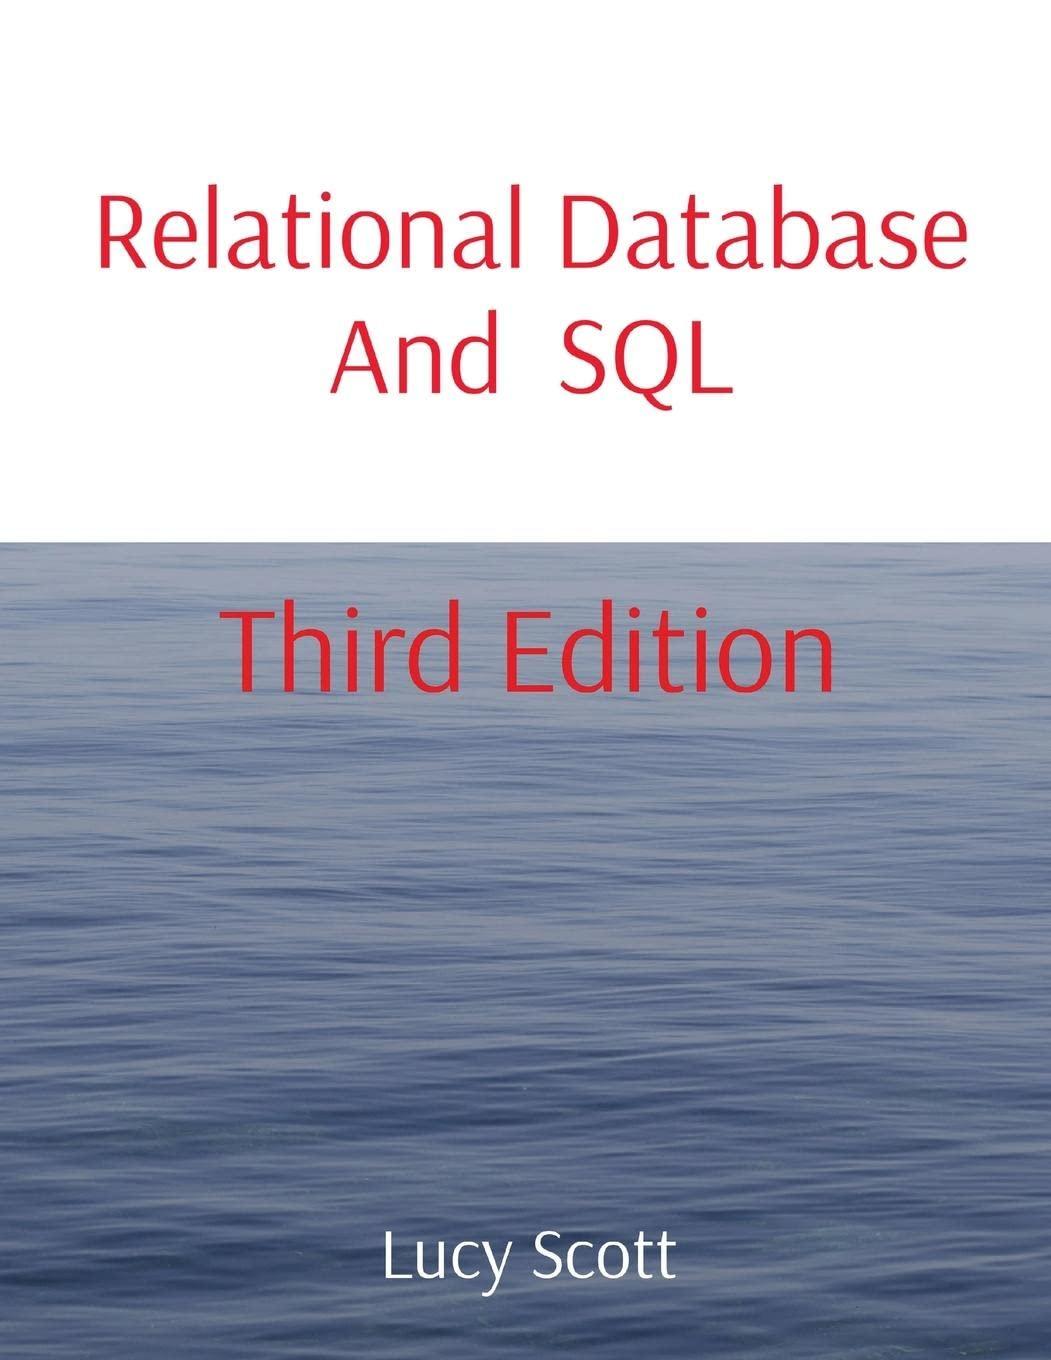 relational database and sql 3rd edition lucy scott 1087899699, 978-1087899695